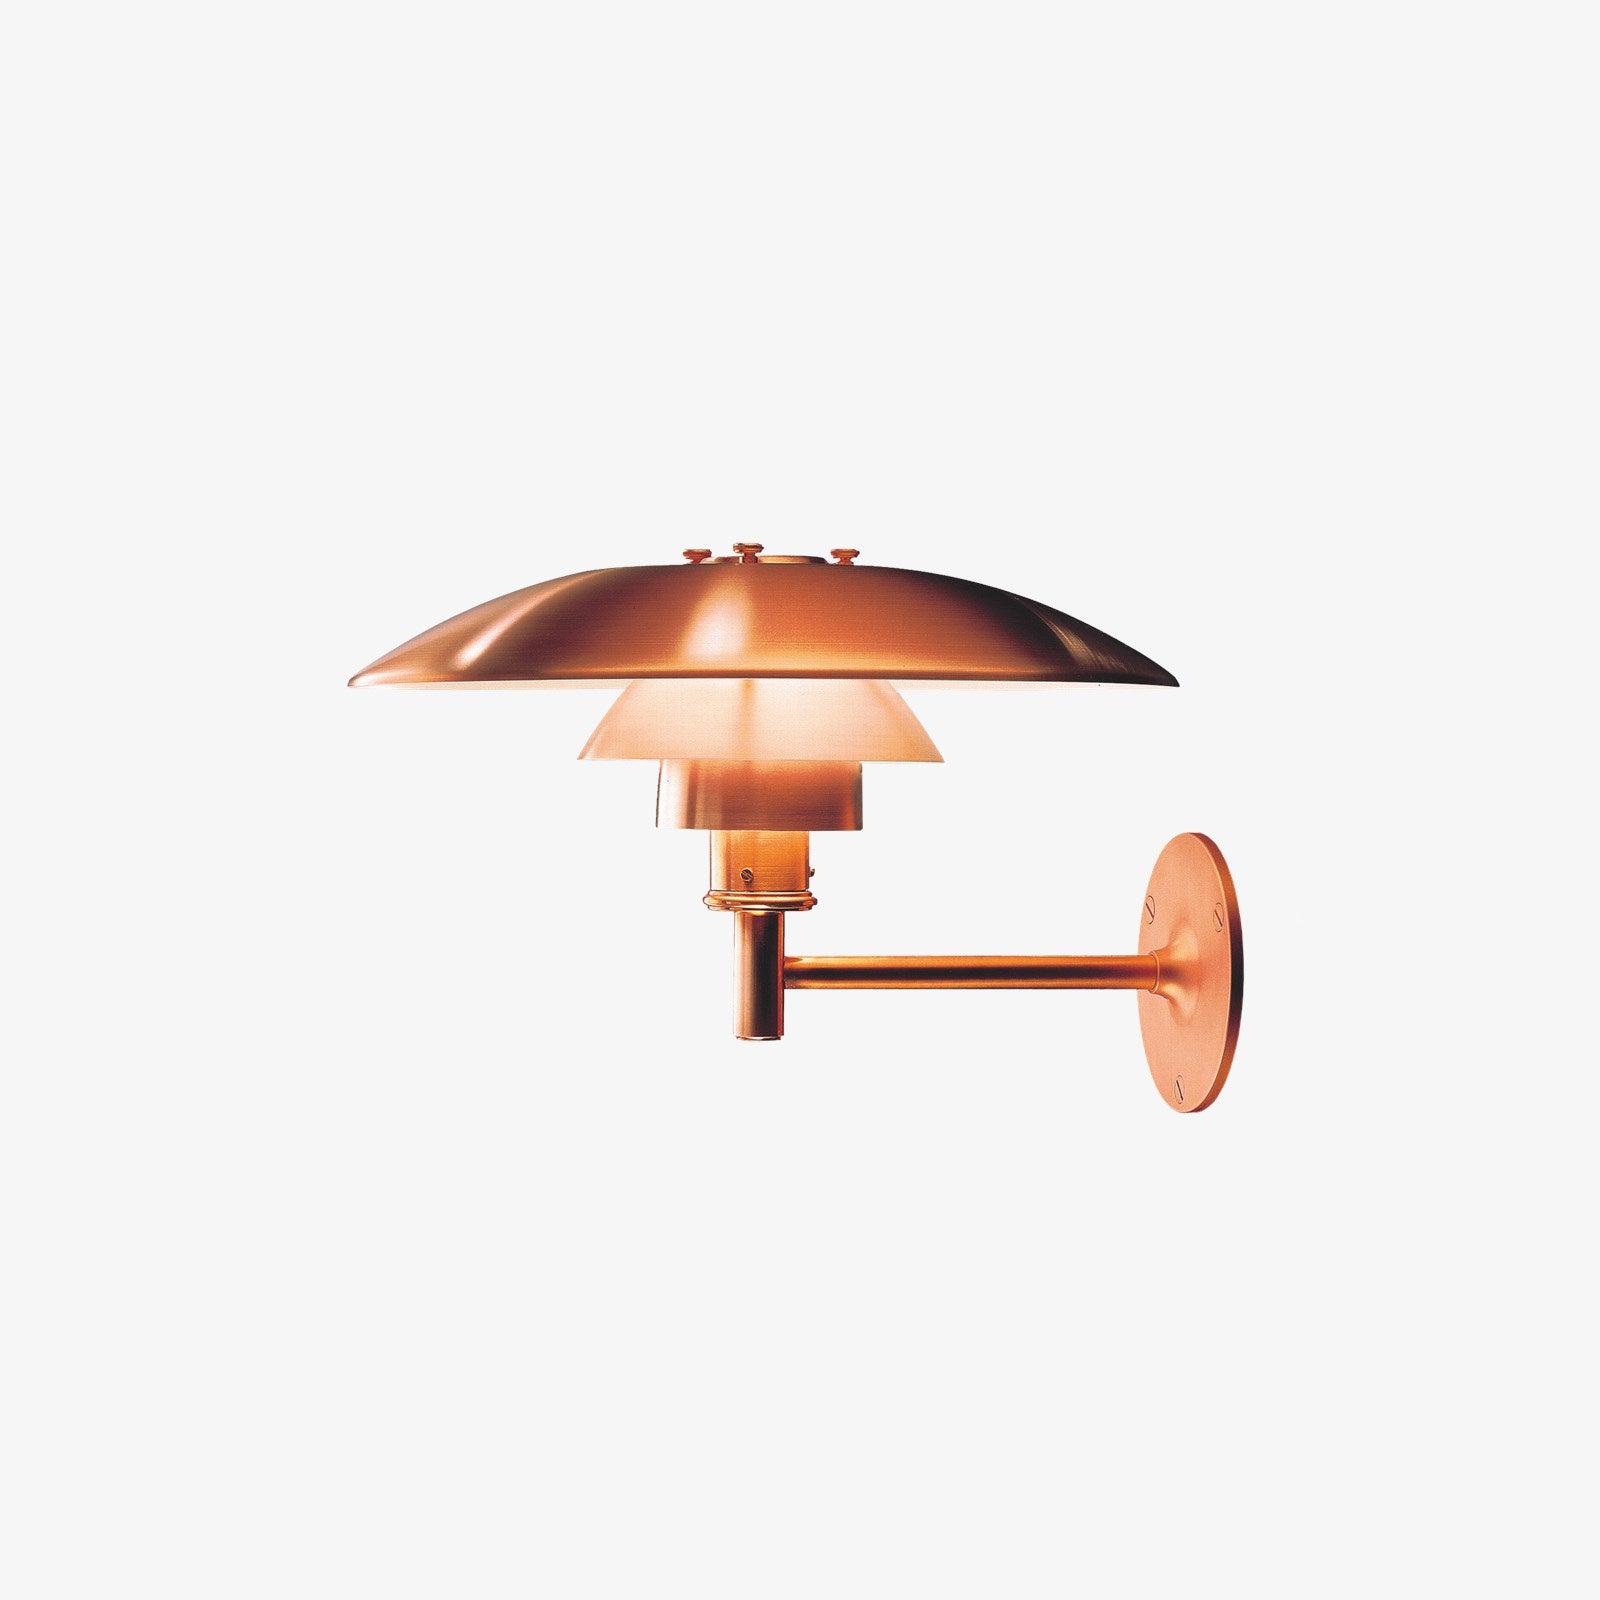 Louis Poulsen PH Wall Lamp with Arm, Copper